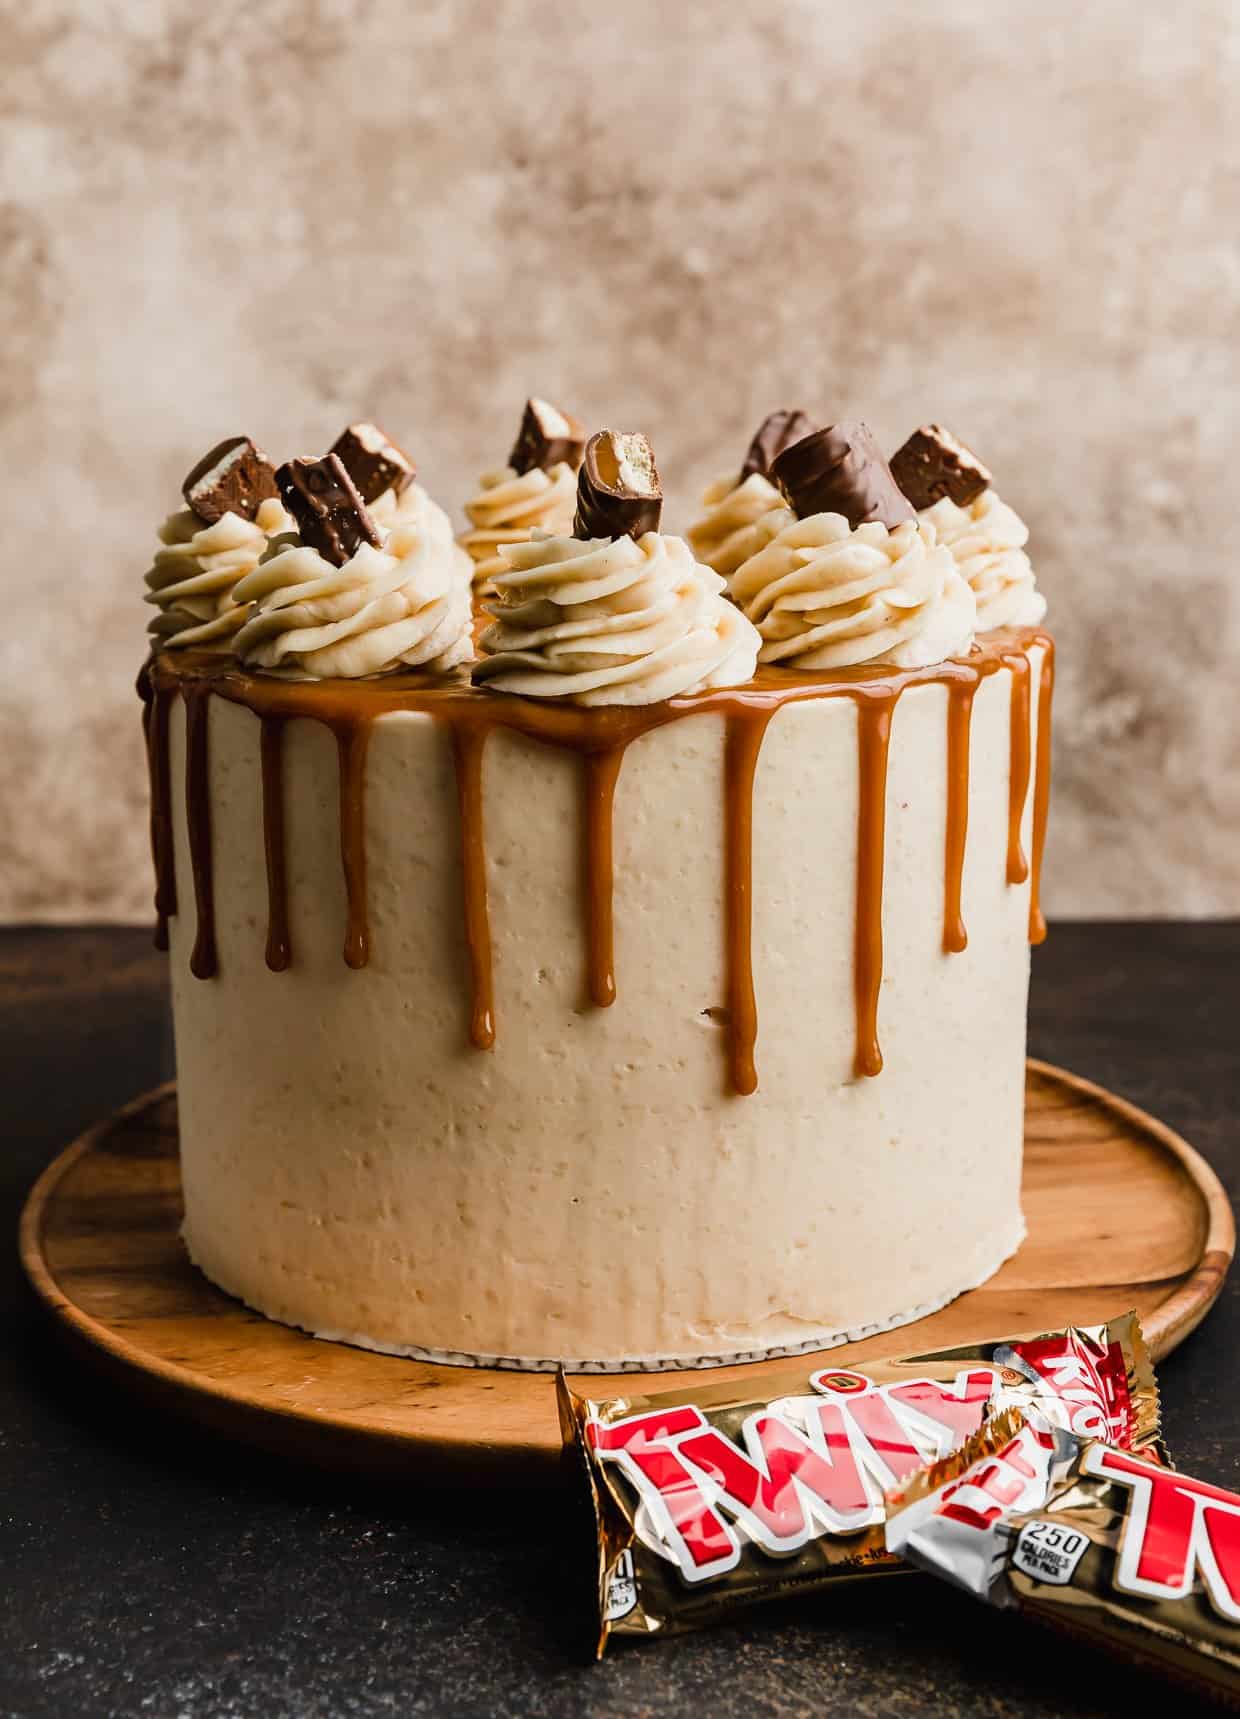 A three layer Twix cake recipe frosted with a tan shortbread buttercream frosting and a caramel drip going down the cake, topped with frosting swirls and Twix pieces.